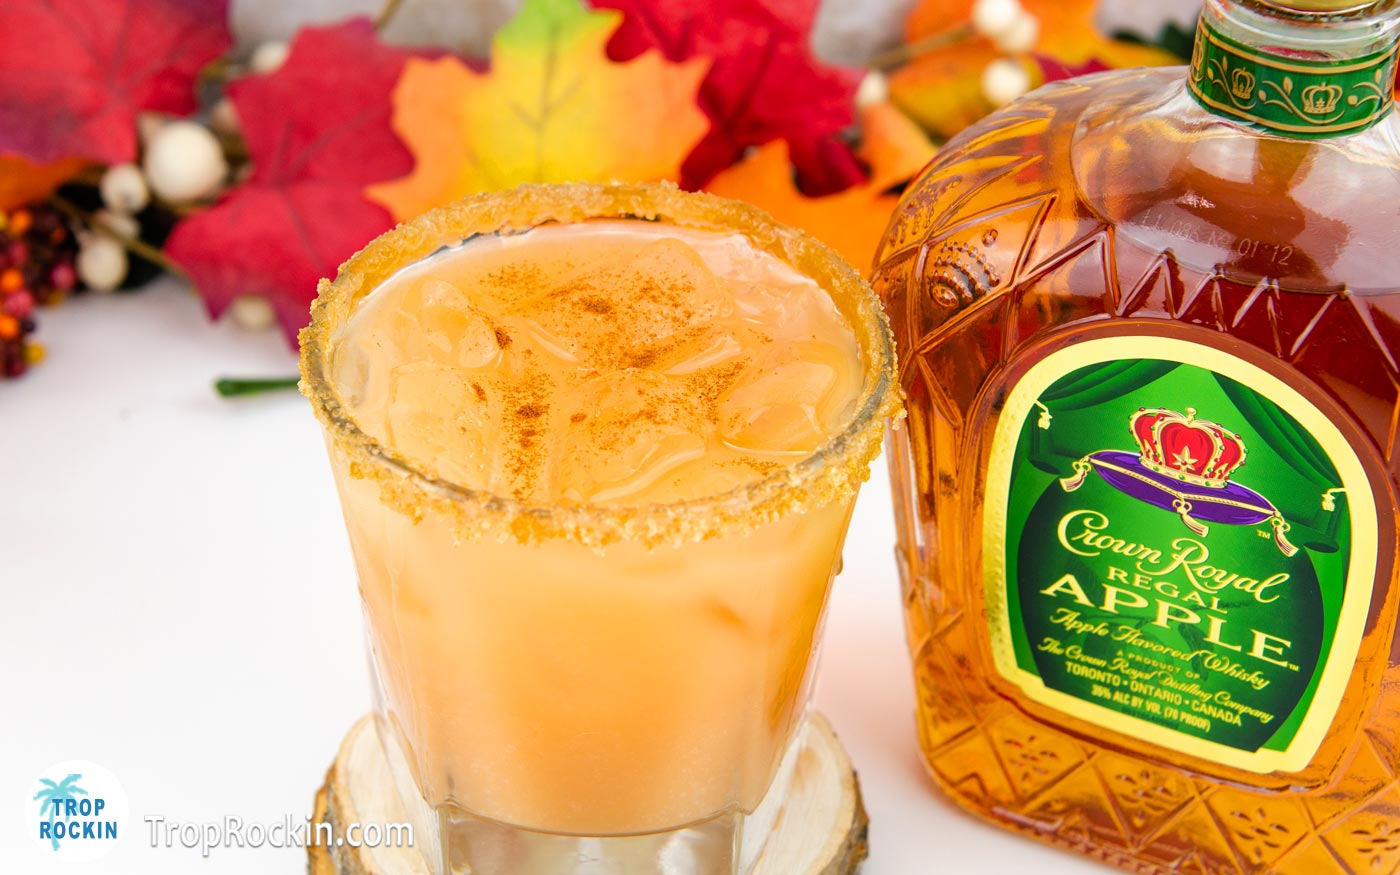 Crown Royal Caramel Apple drink with brown sugar and caramel rim next to a bottle of Crown Royal Apple Whisky.